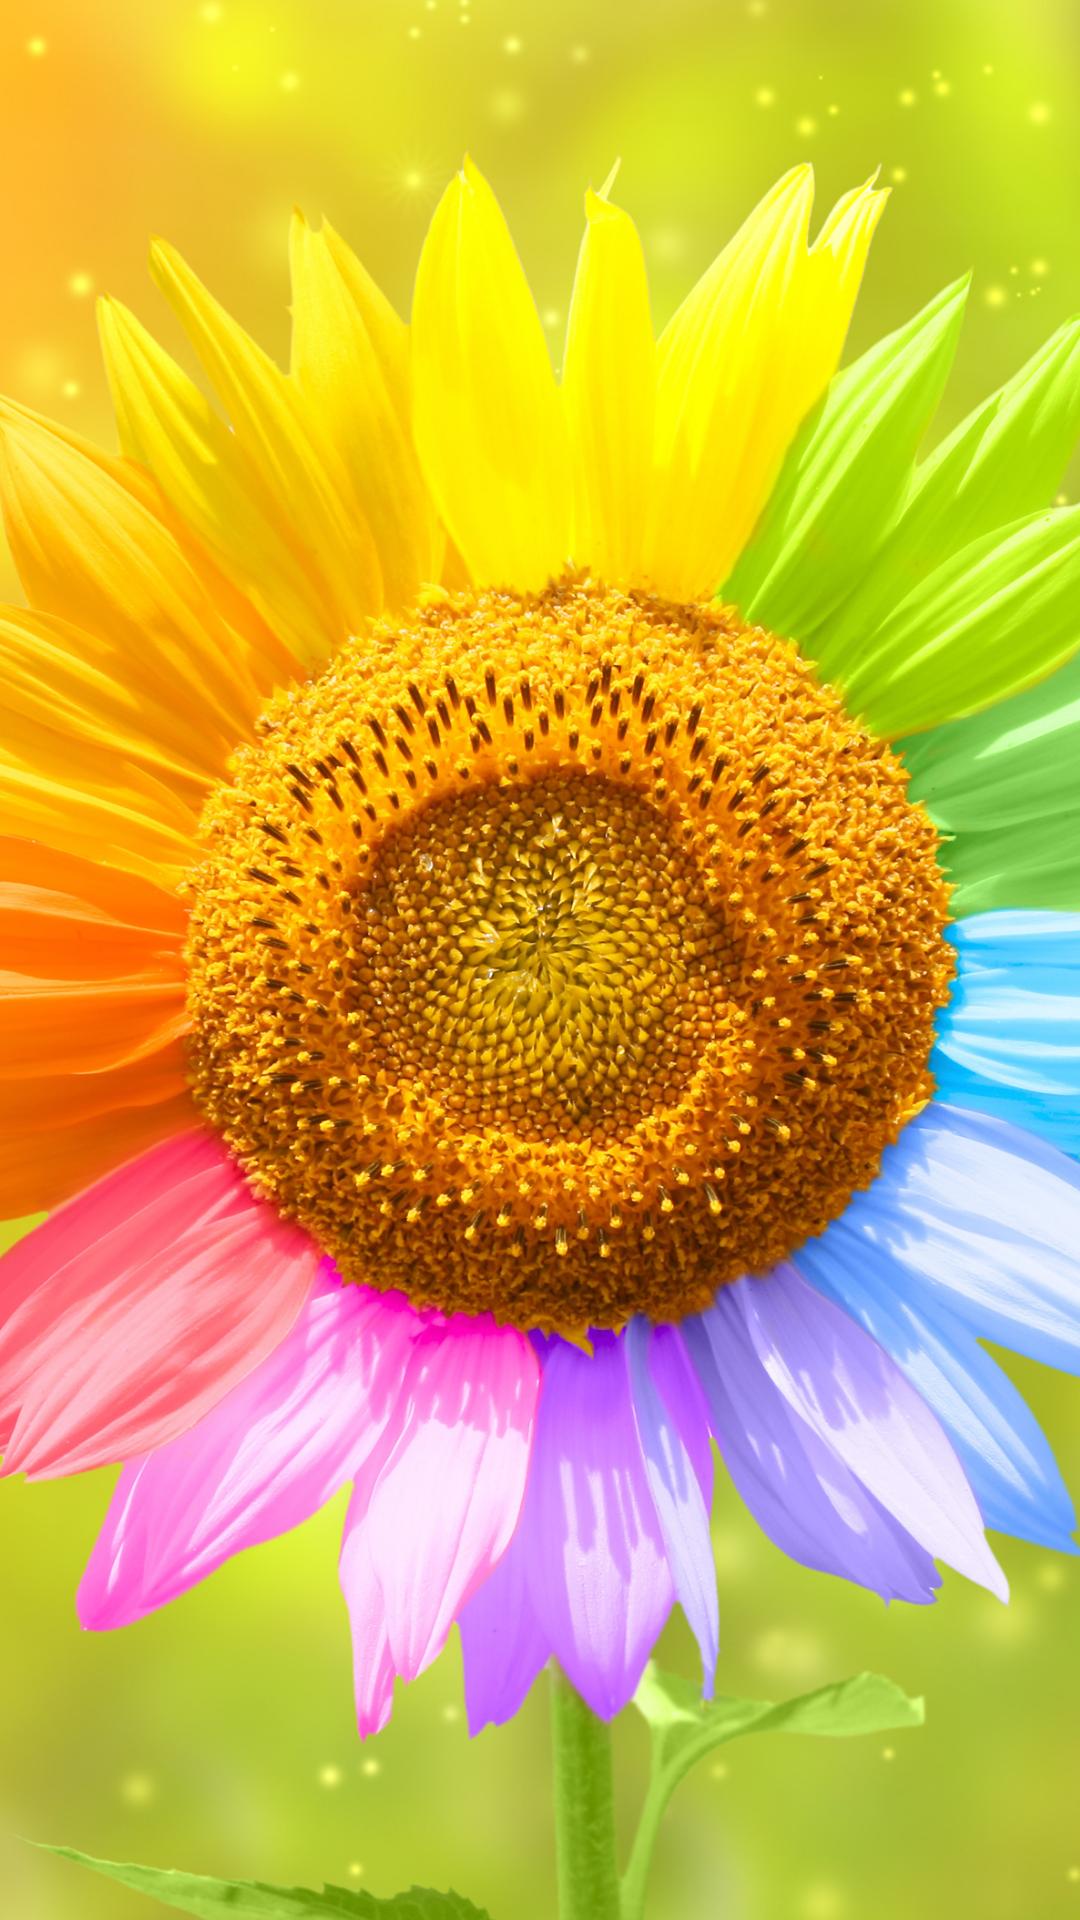 A sunflower with many different colors on it - Indie